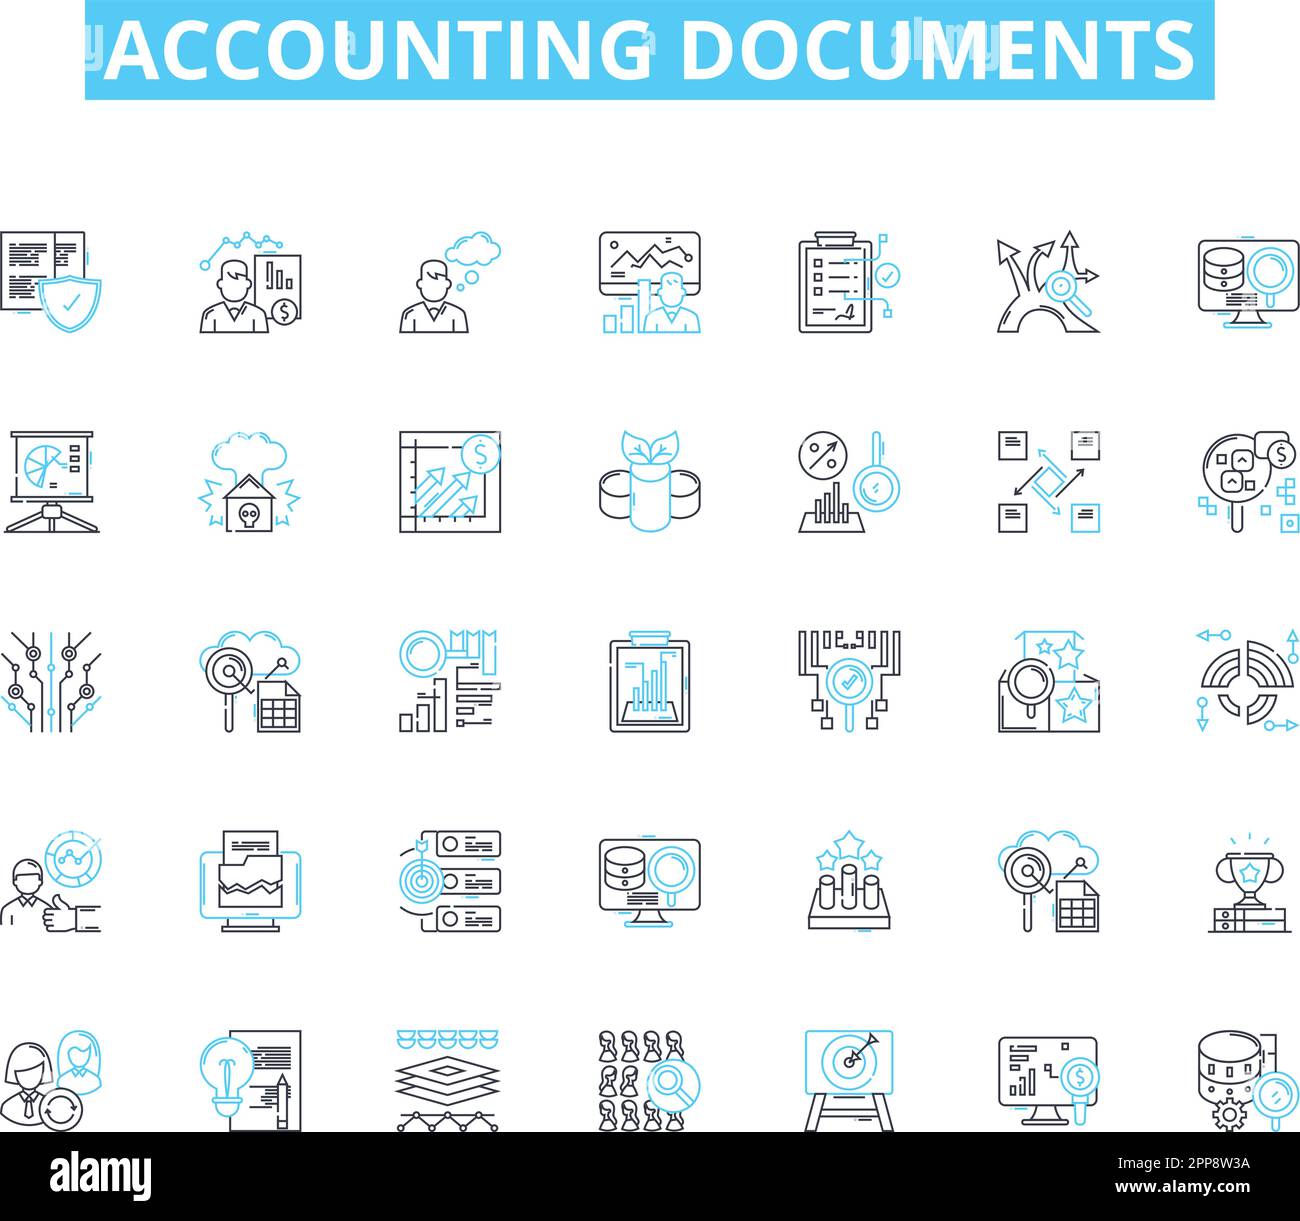 Accounting documents linear icons set. Ledger, Journal, Balance sheet, Income statement, Cash flow statement, Tax return, Invoice line vector and Stock Vector